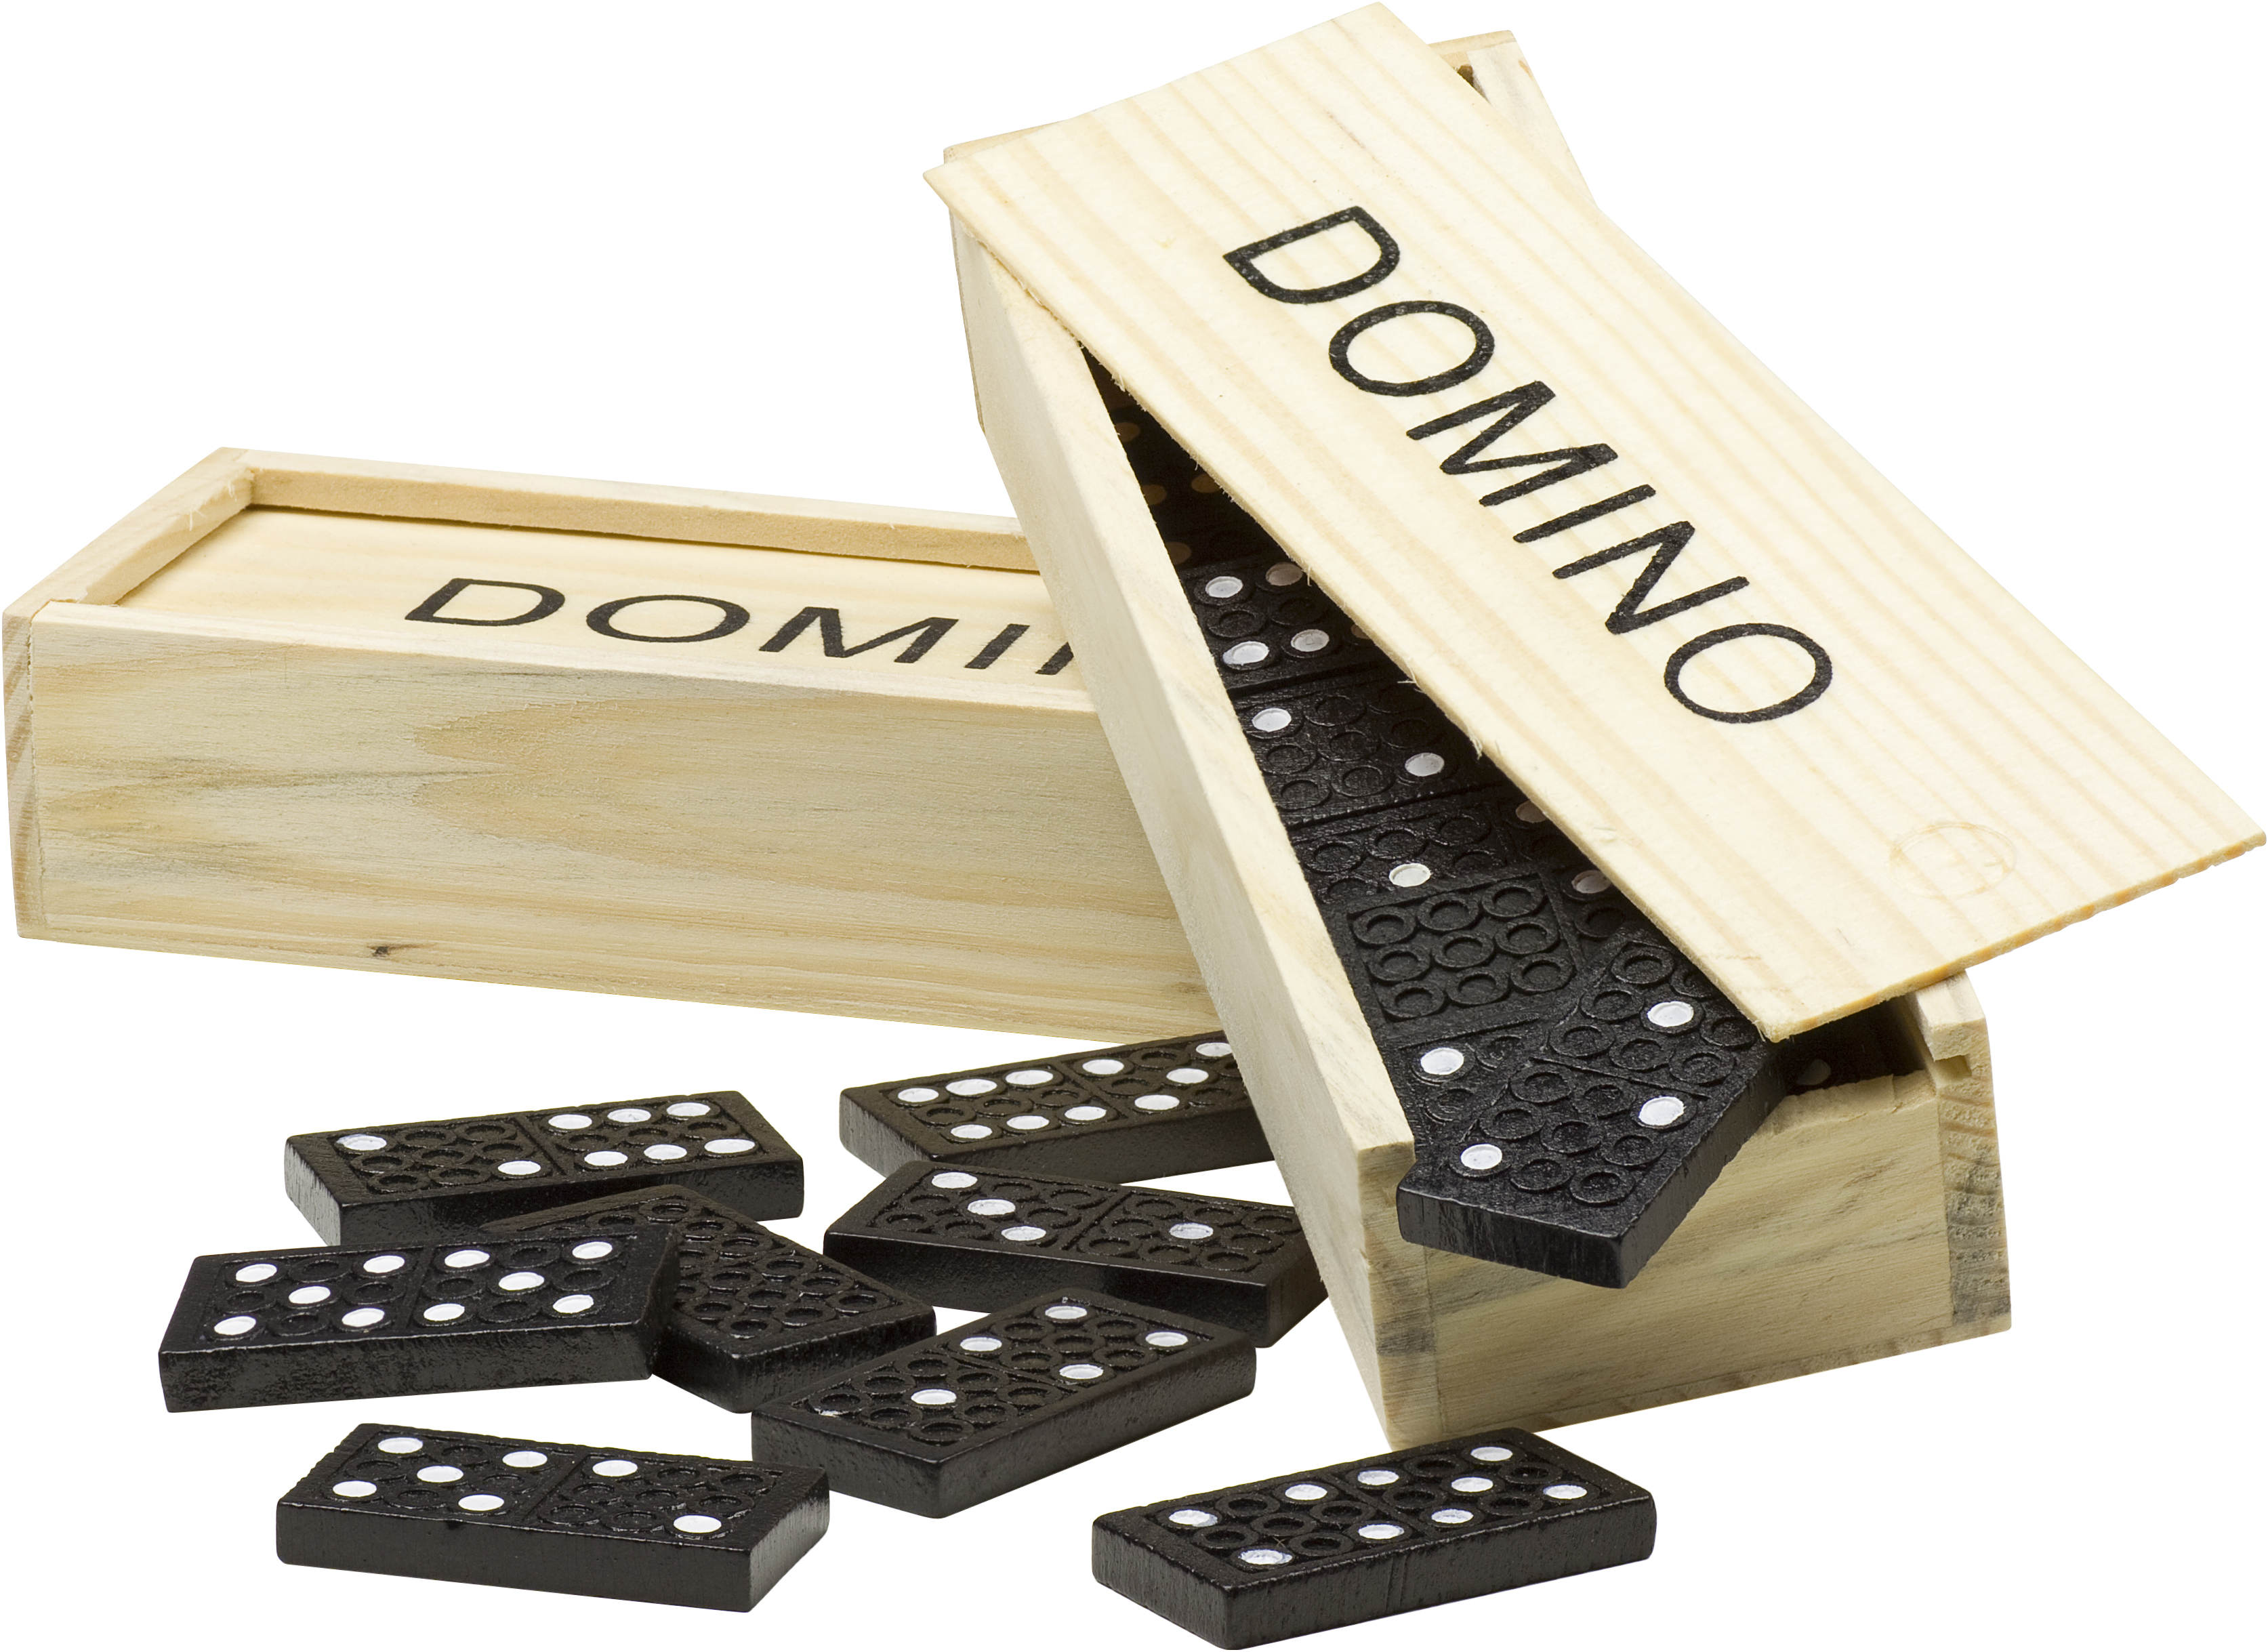 002546 011999999 3d090 ovr pro01 fal - Domino game